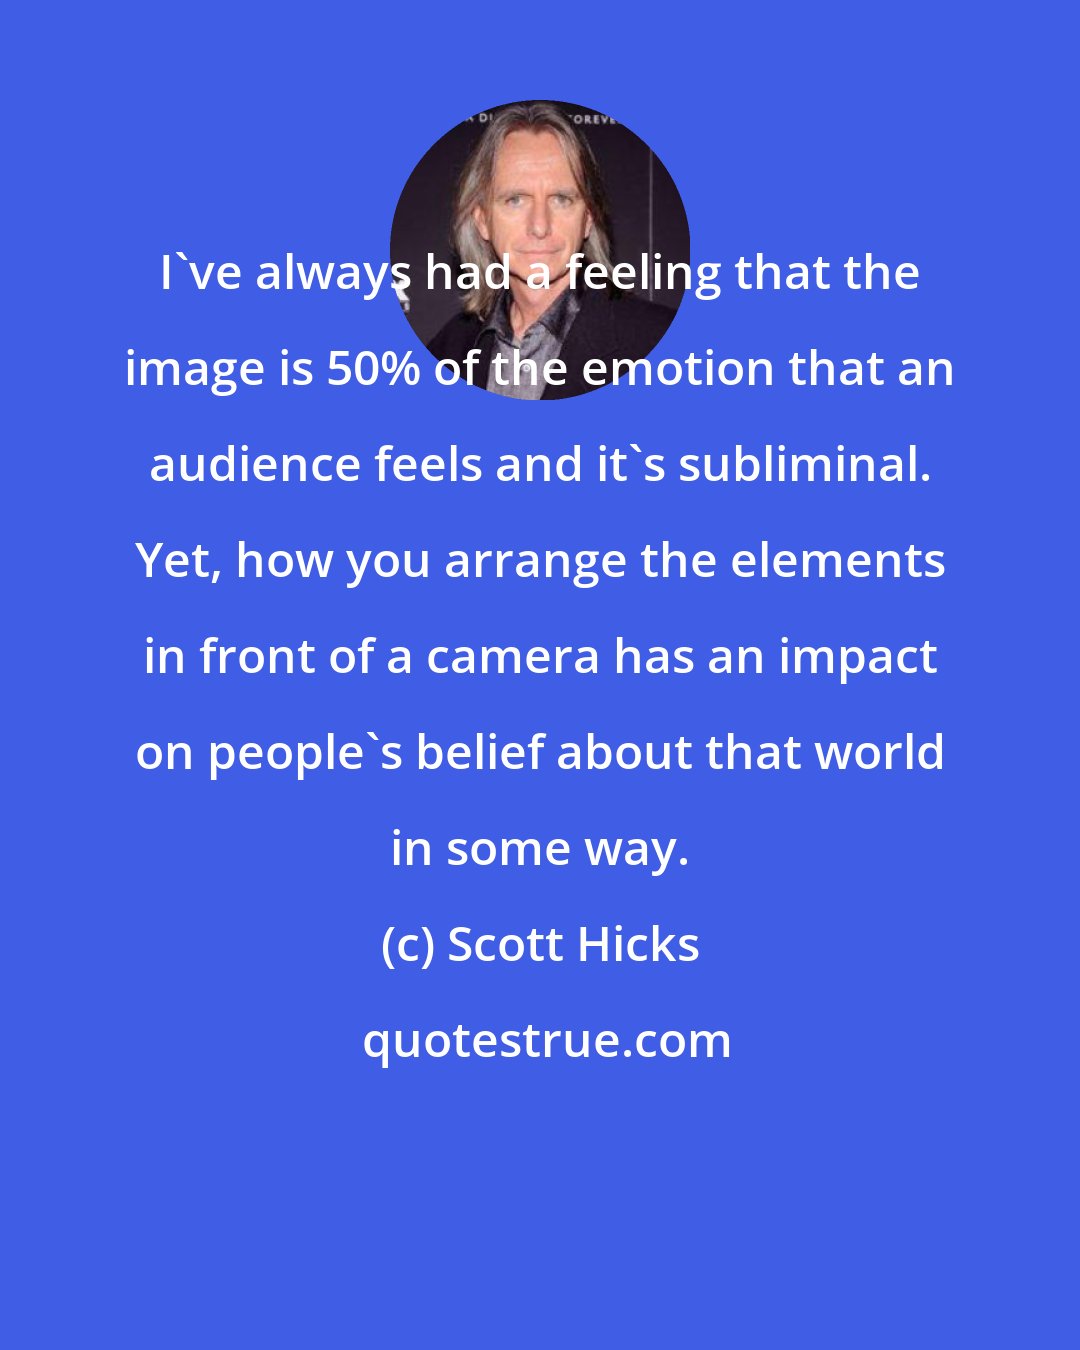 Scott Hicks: I've always had a feeling that the image is 50% of the emotion that an audience feels and it's subliminal. Yet, how you arrange the elements in front of a camera has an impact on people's belief about that world in some way.